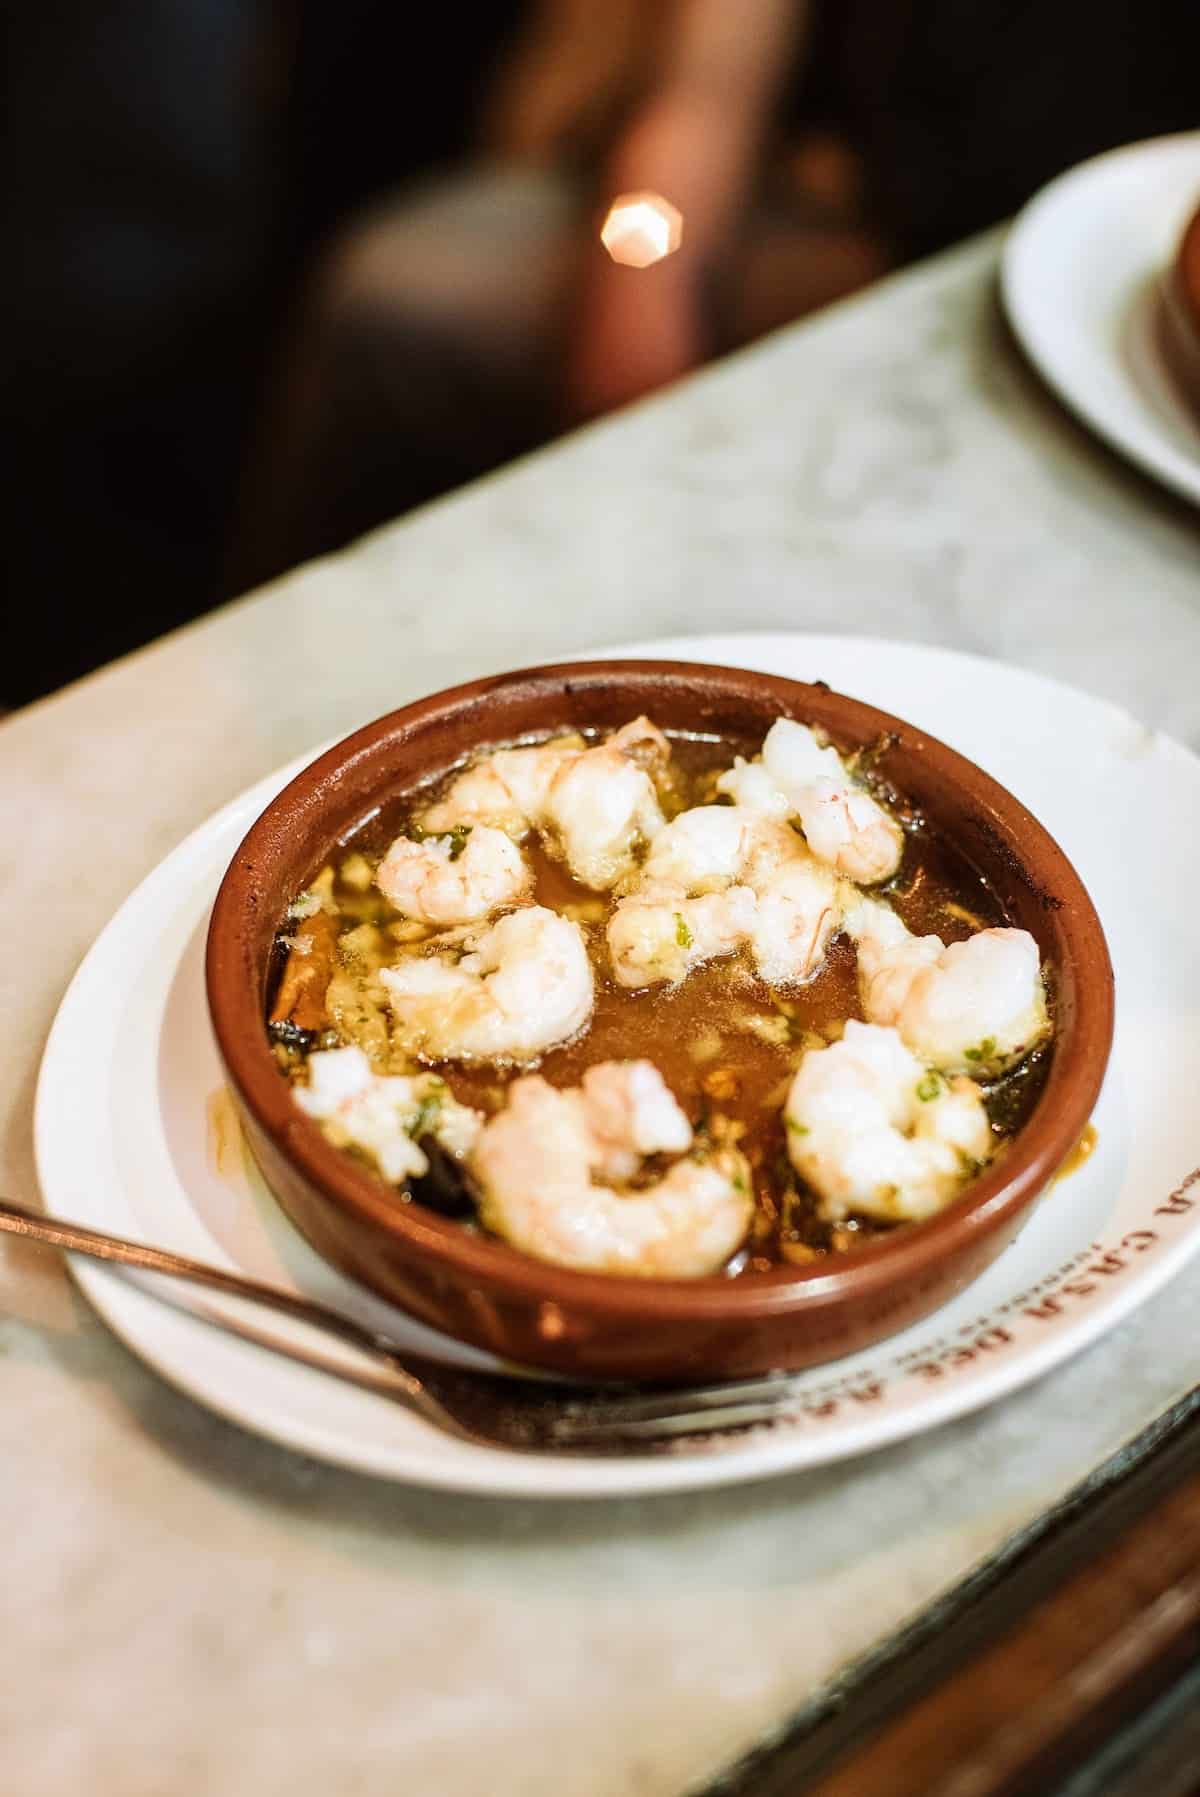 Garlic shrimp served in a small clay dish.